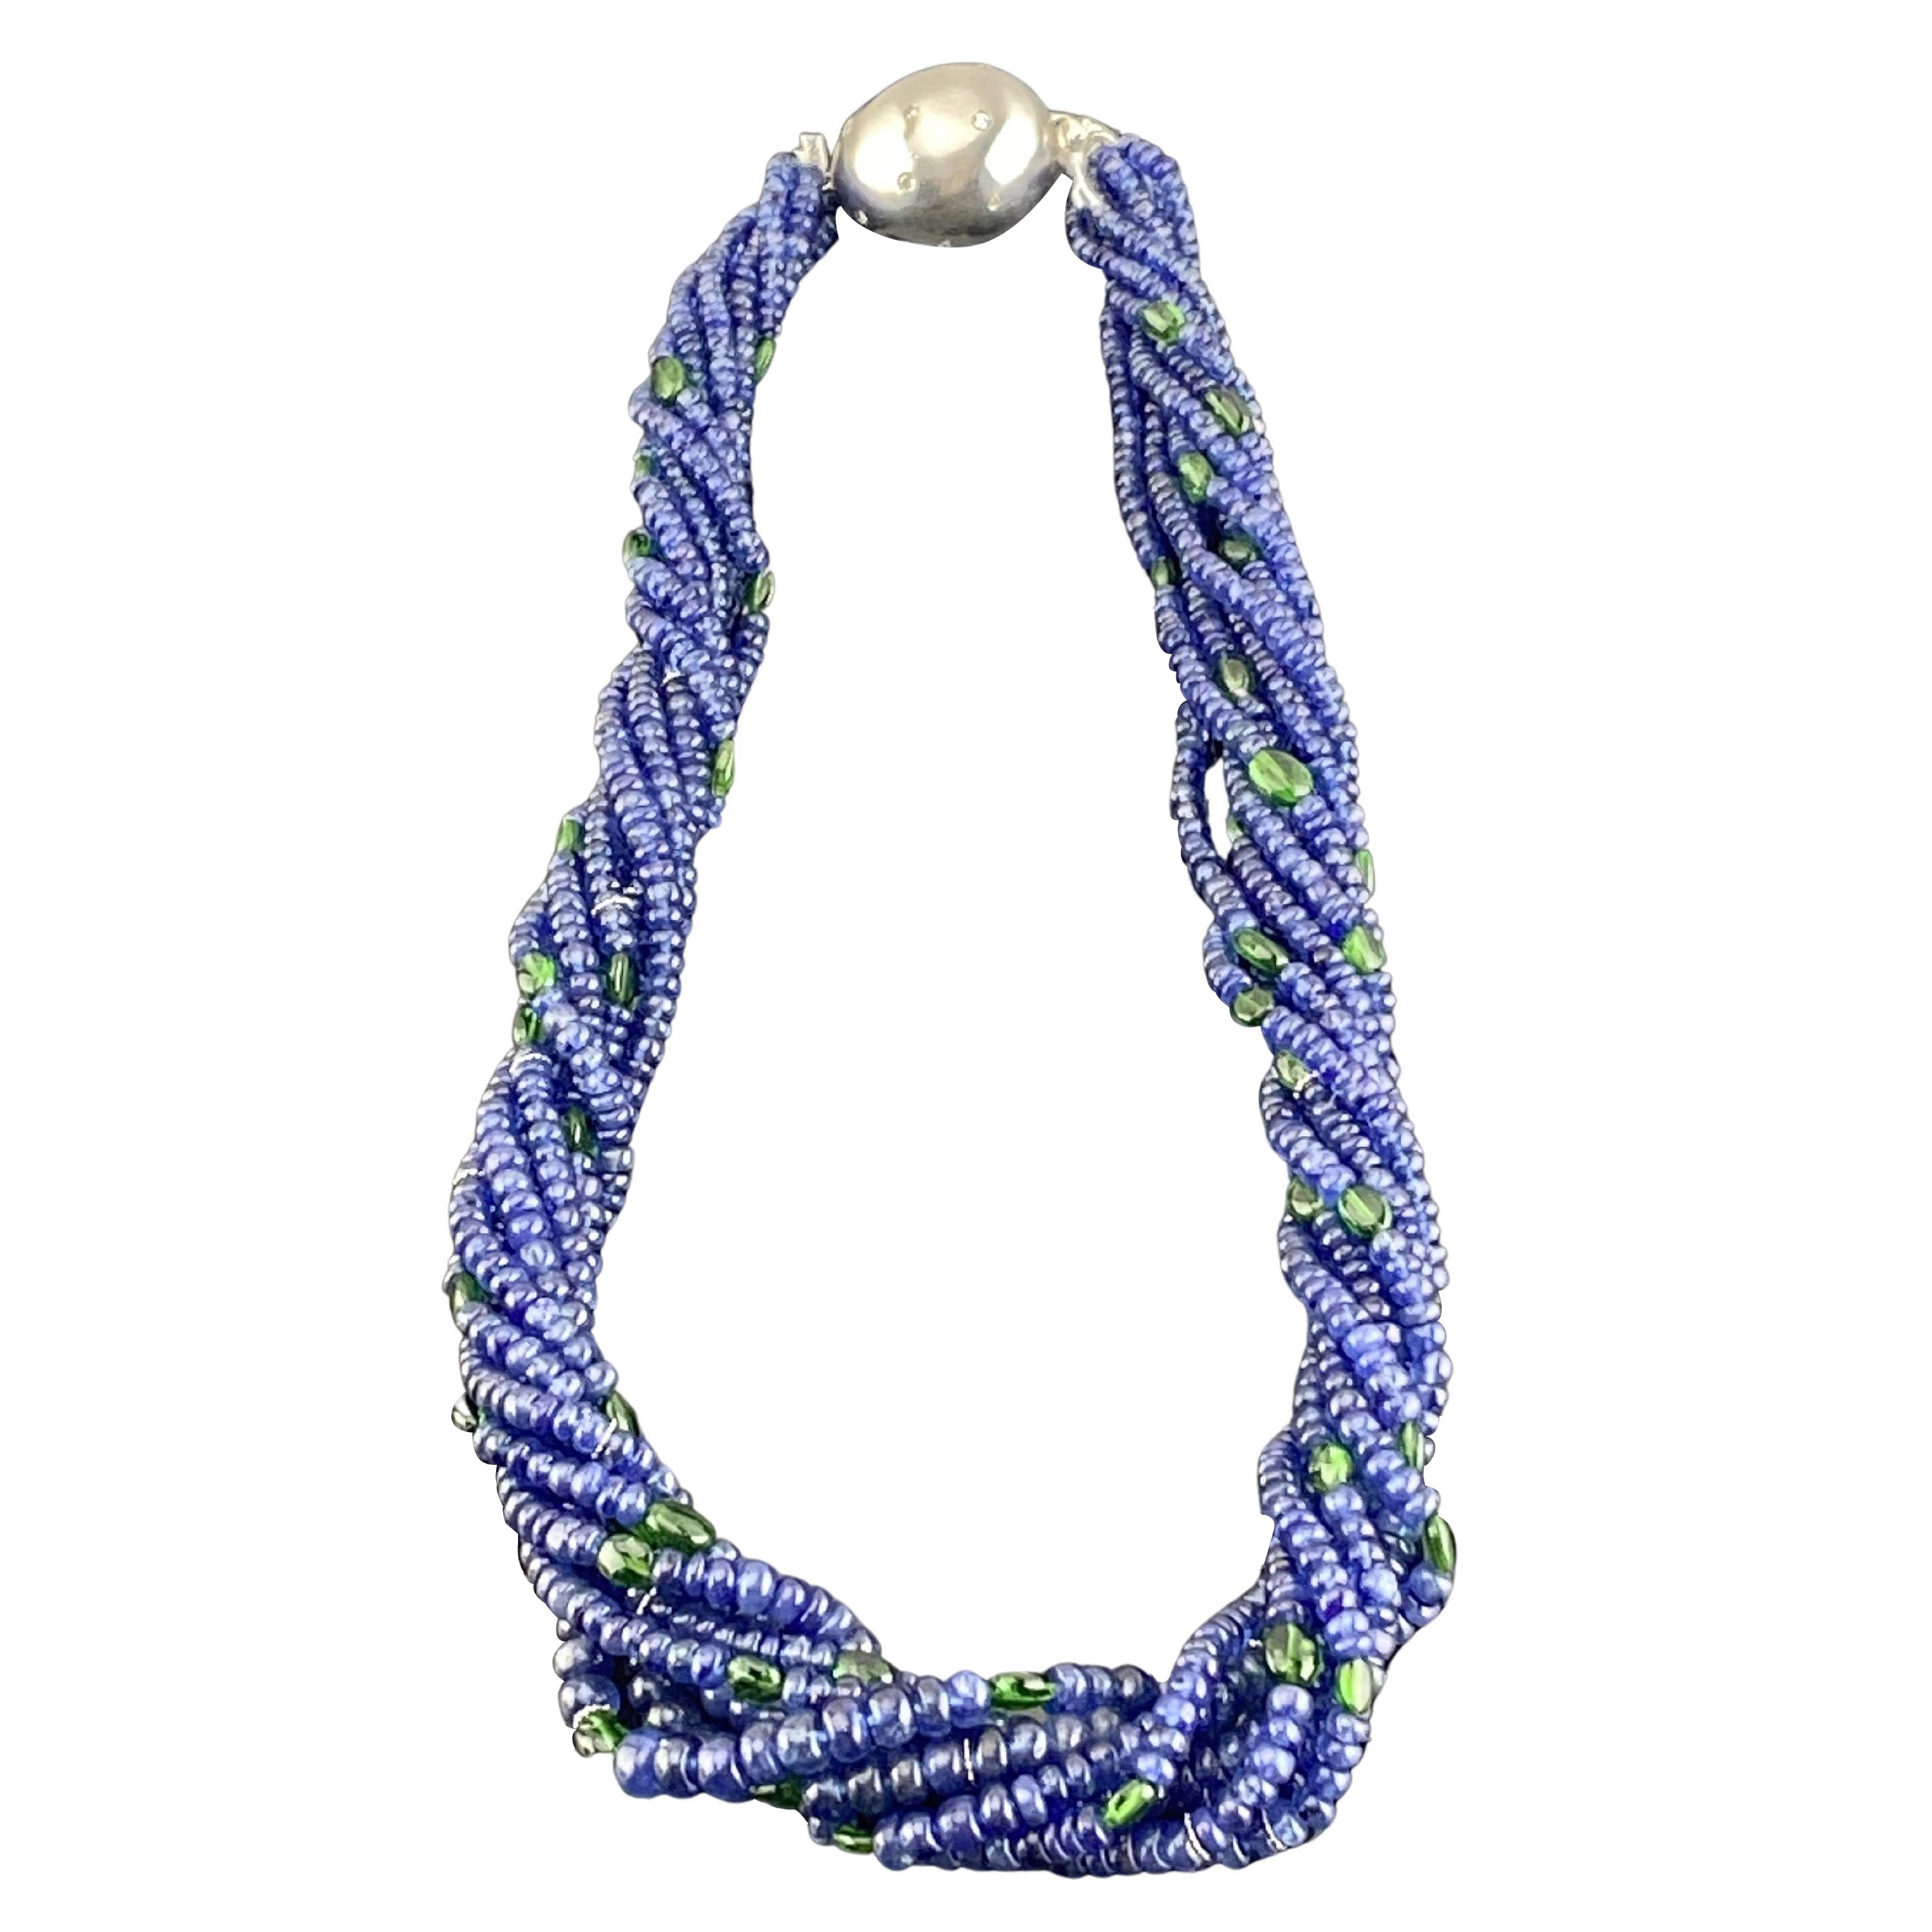 Blue Sapphire and Emerald Multi Strand Beaded Necklace